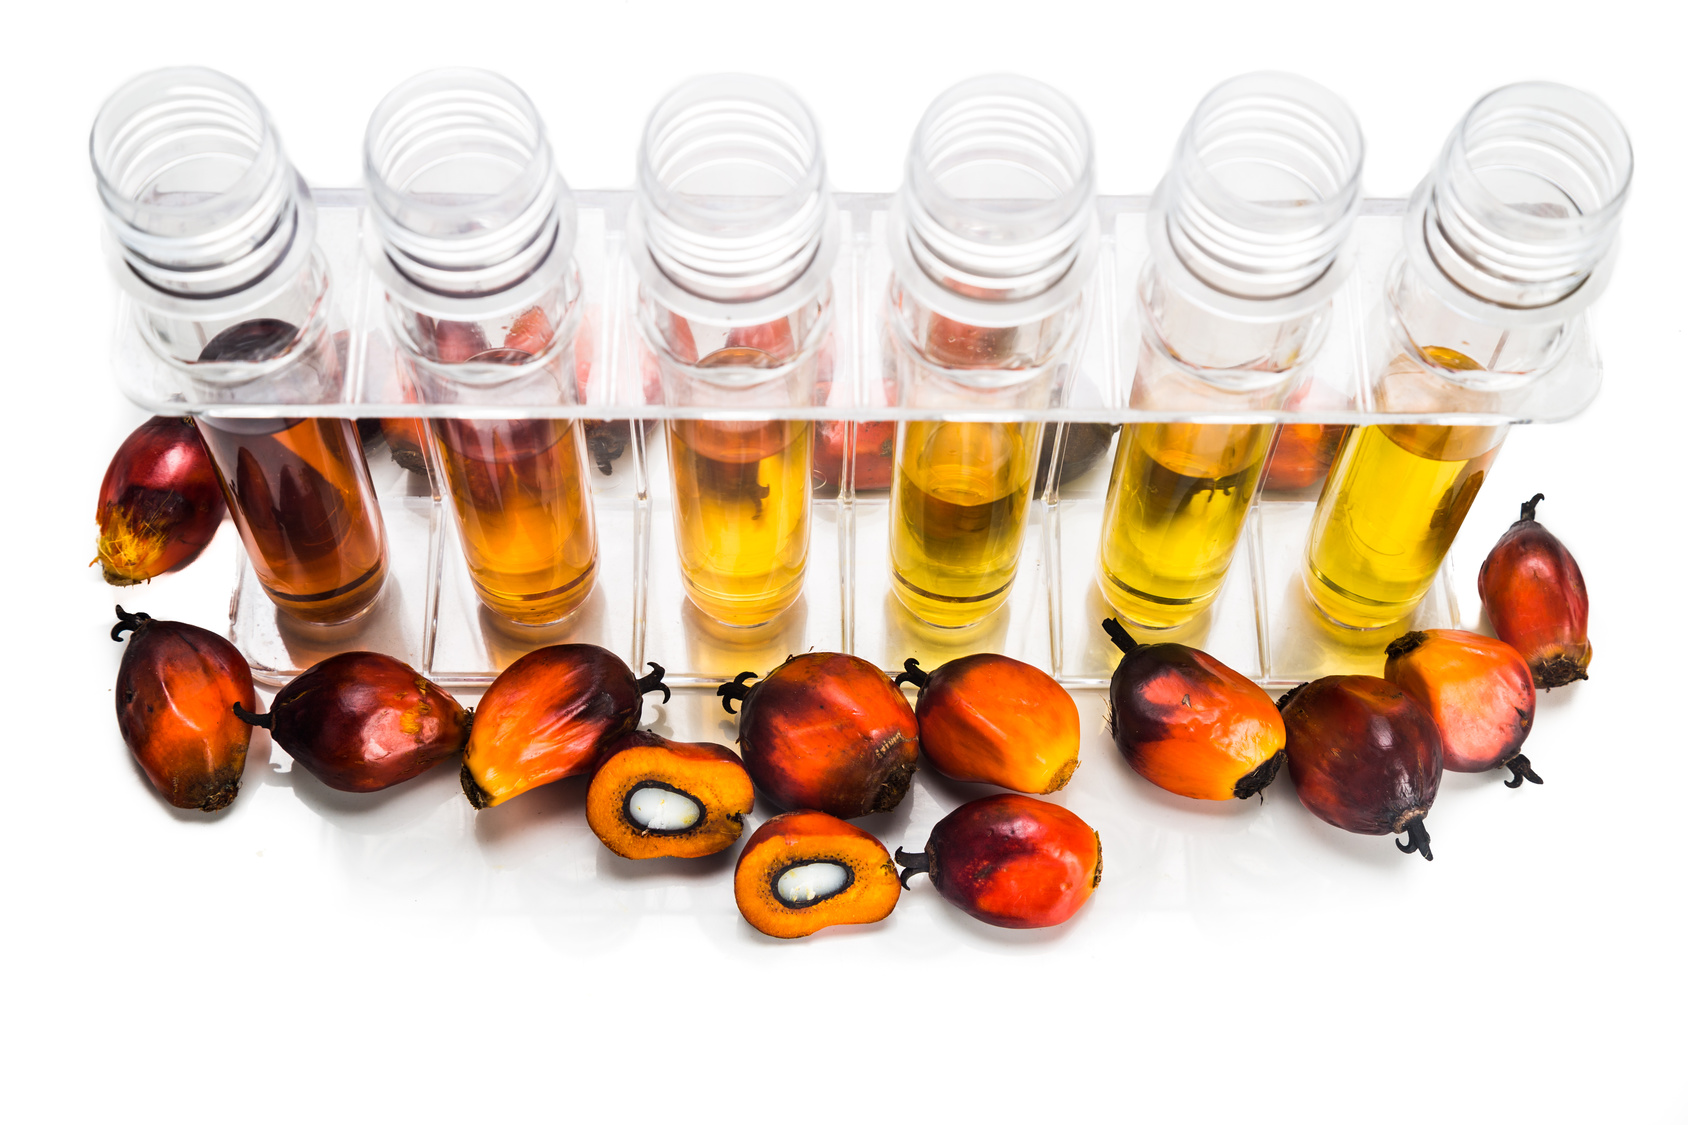 Oil palm biofuel biodiesel with test tubes on white background